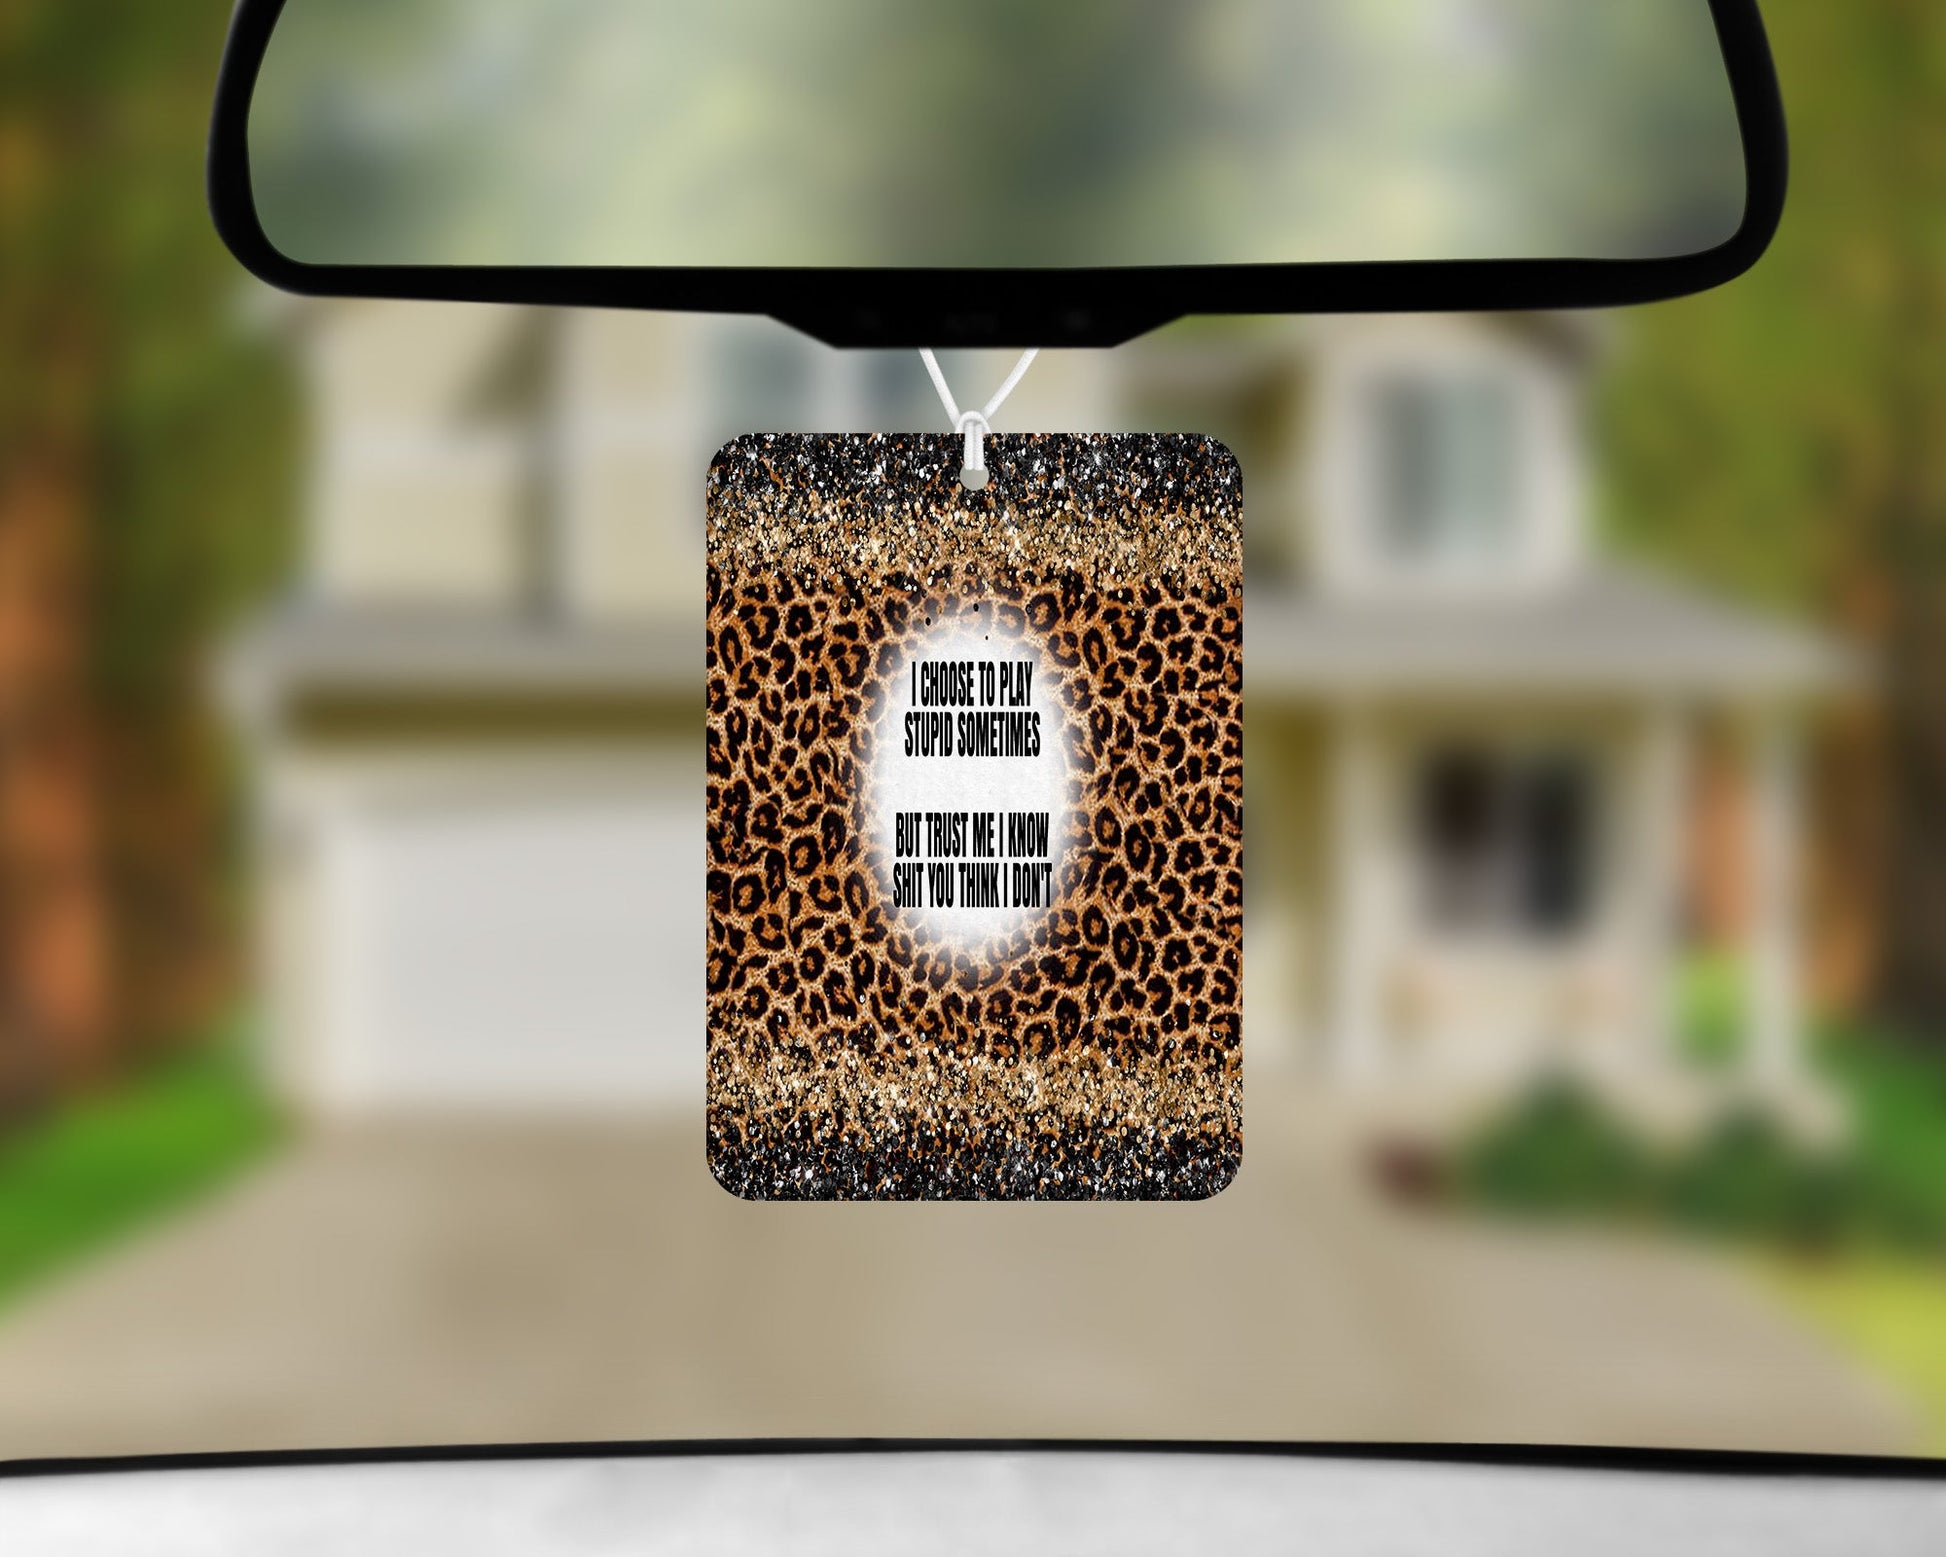 I Choose To Play Stupid |Freshie|Includes Scent Bottle - Vehicle Air Freshener